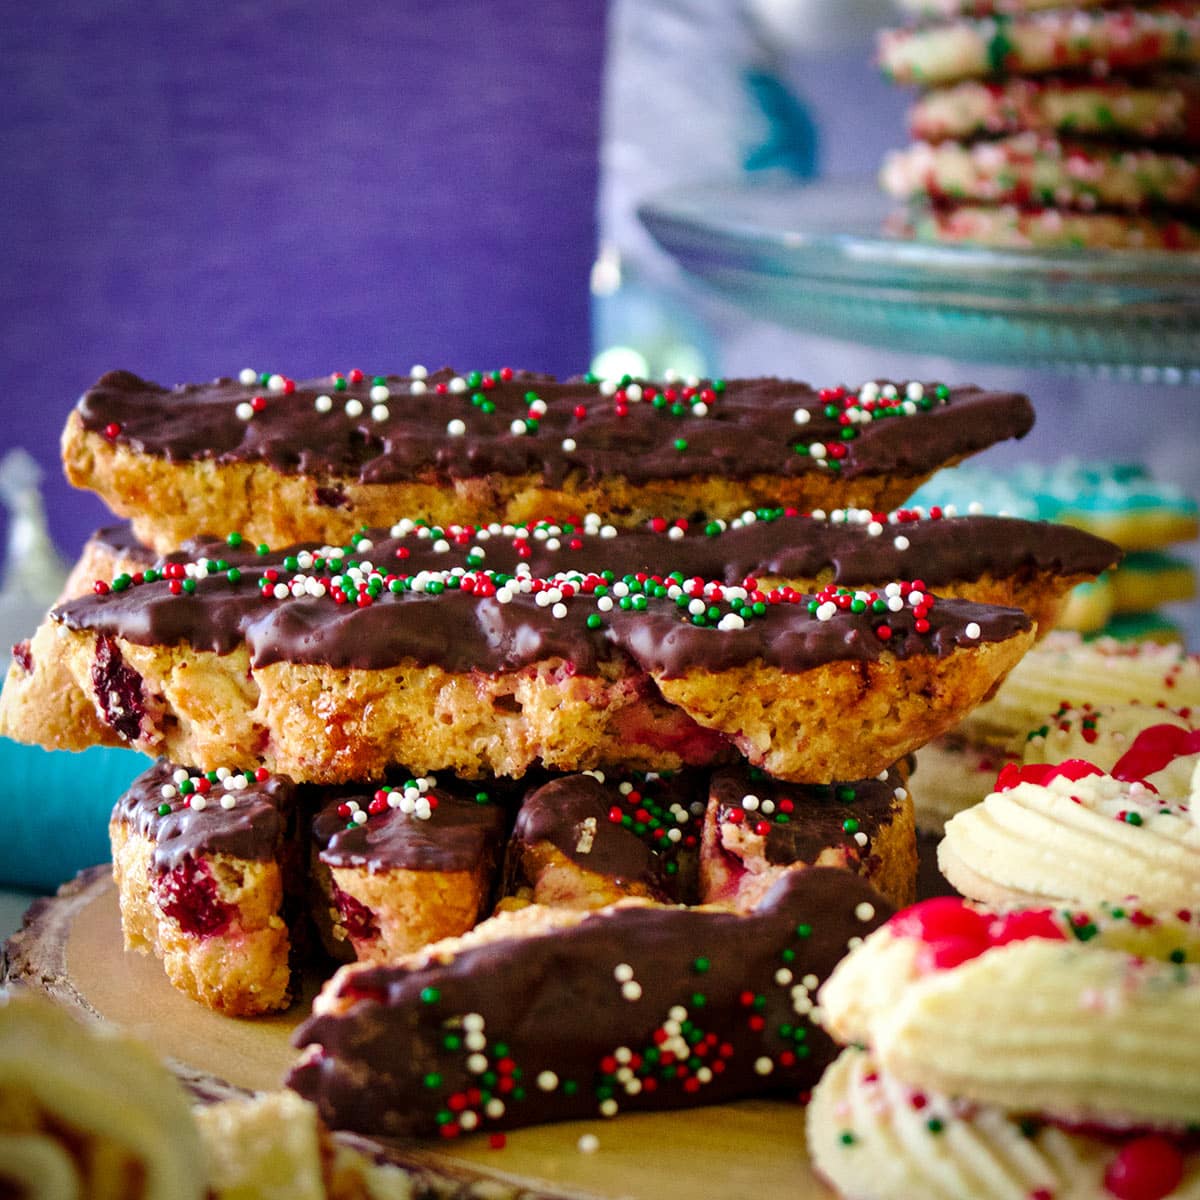 A wood tray piled high with several kinds of Christmas cookies including cranberry orange biscotti dipped in dark chocolate.